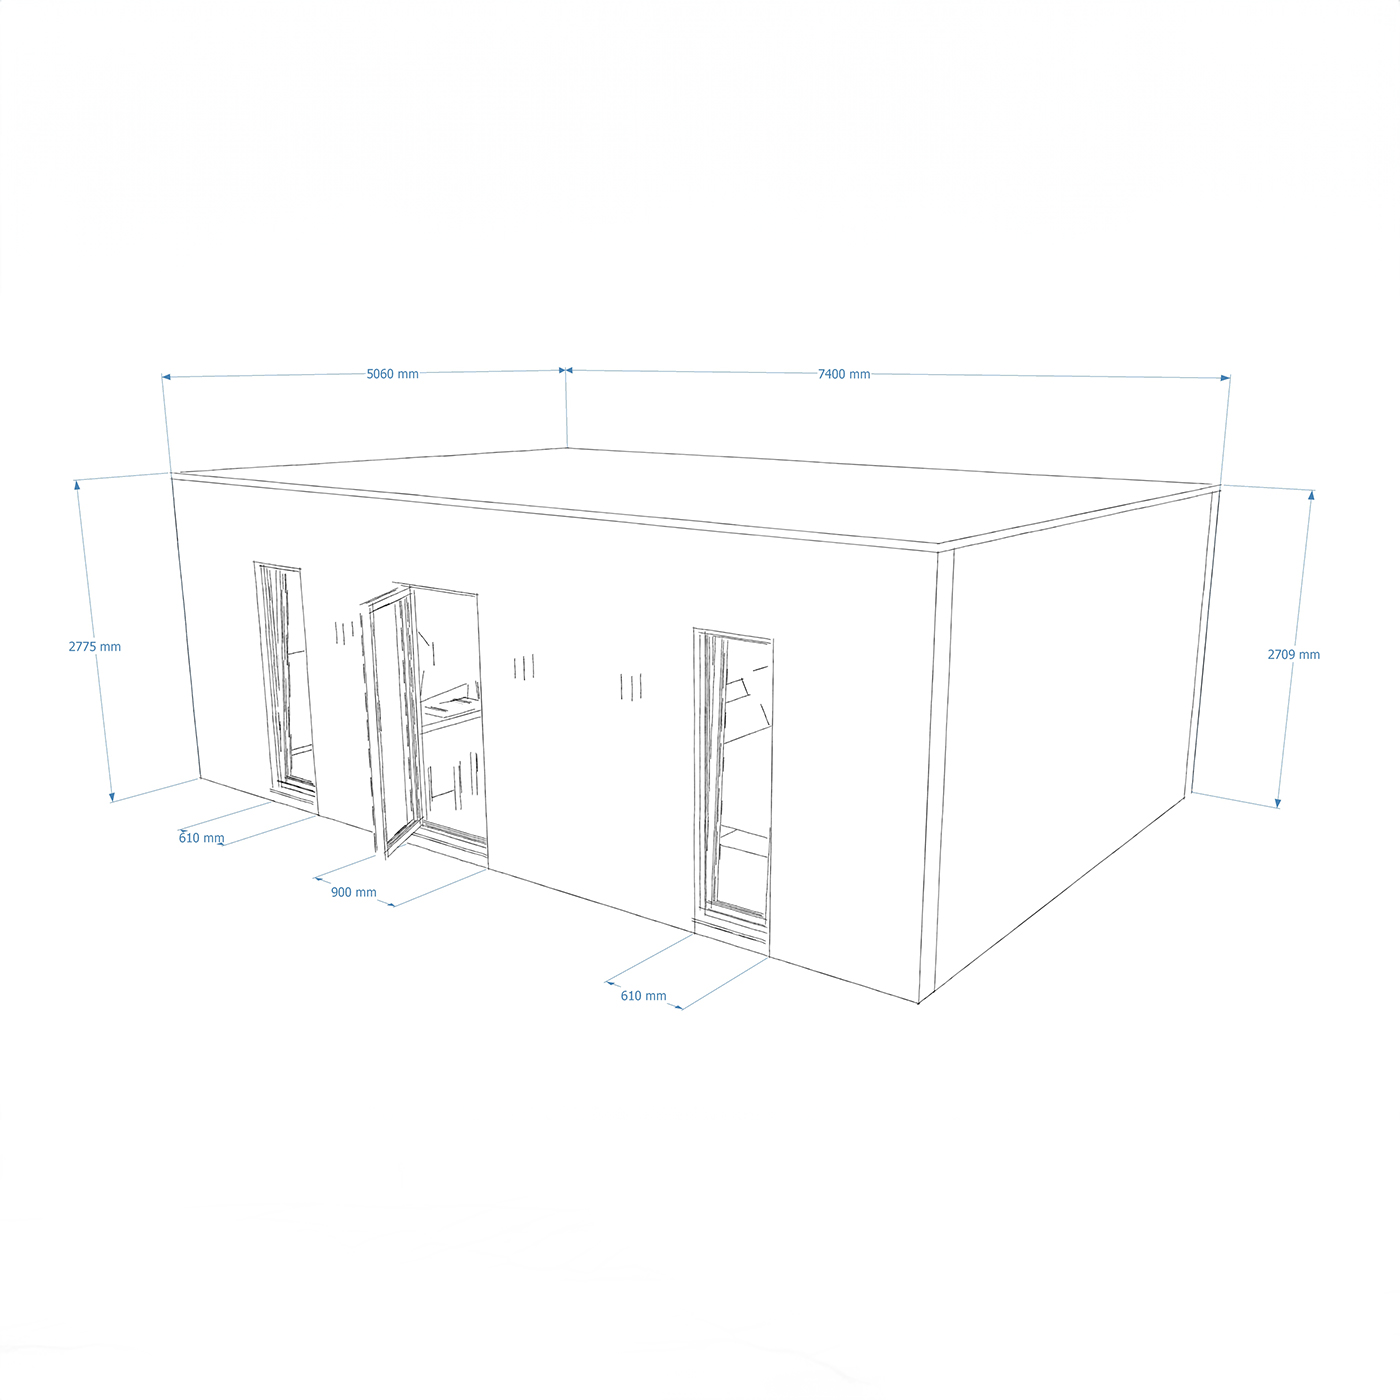 Exterior dimensions for 5.0m by 7.4m mobile home